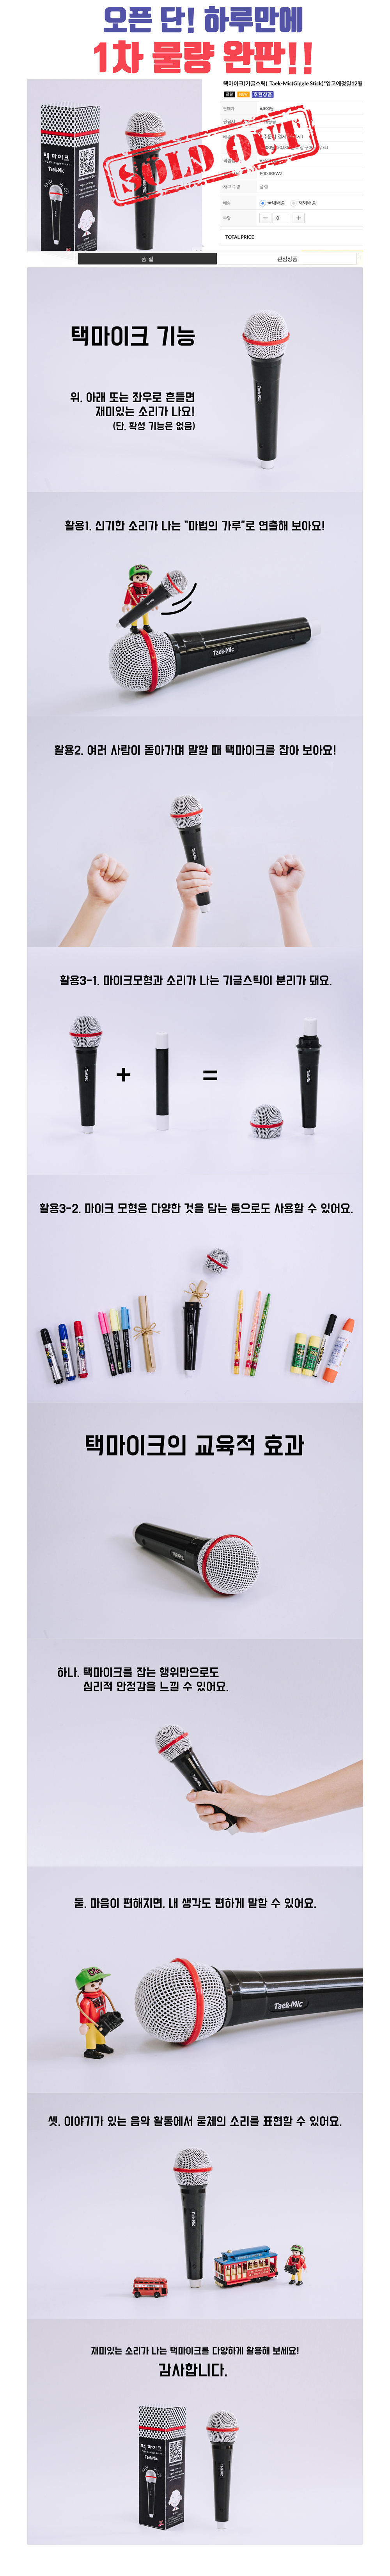 Cosmetic product detailed image-S1L4